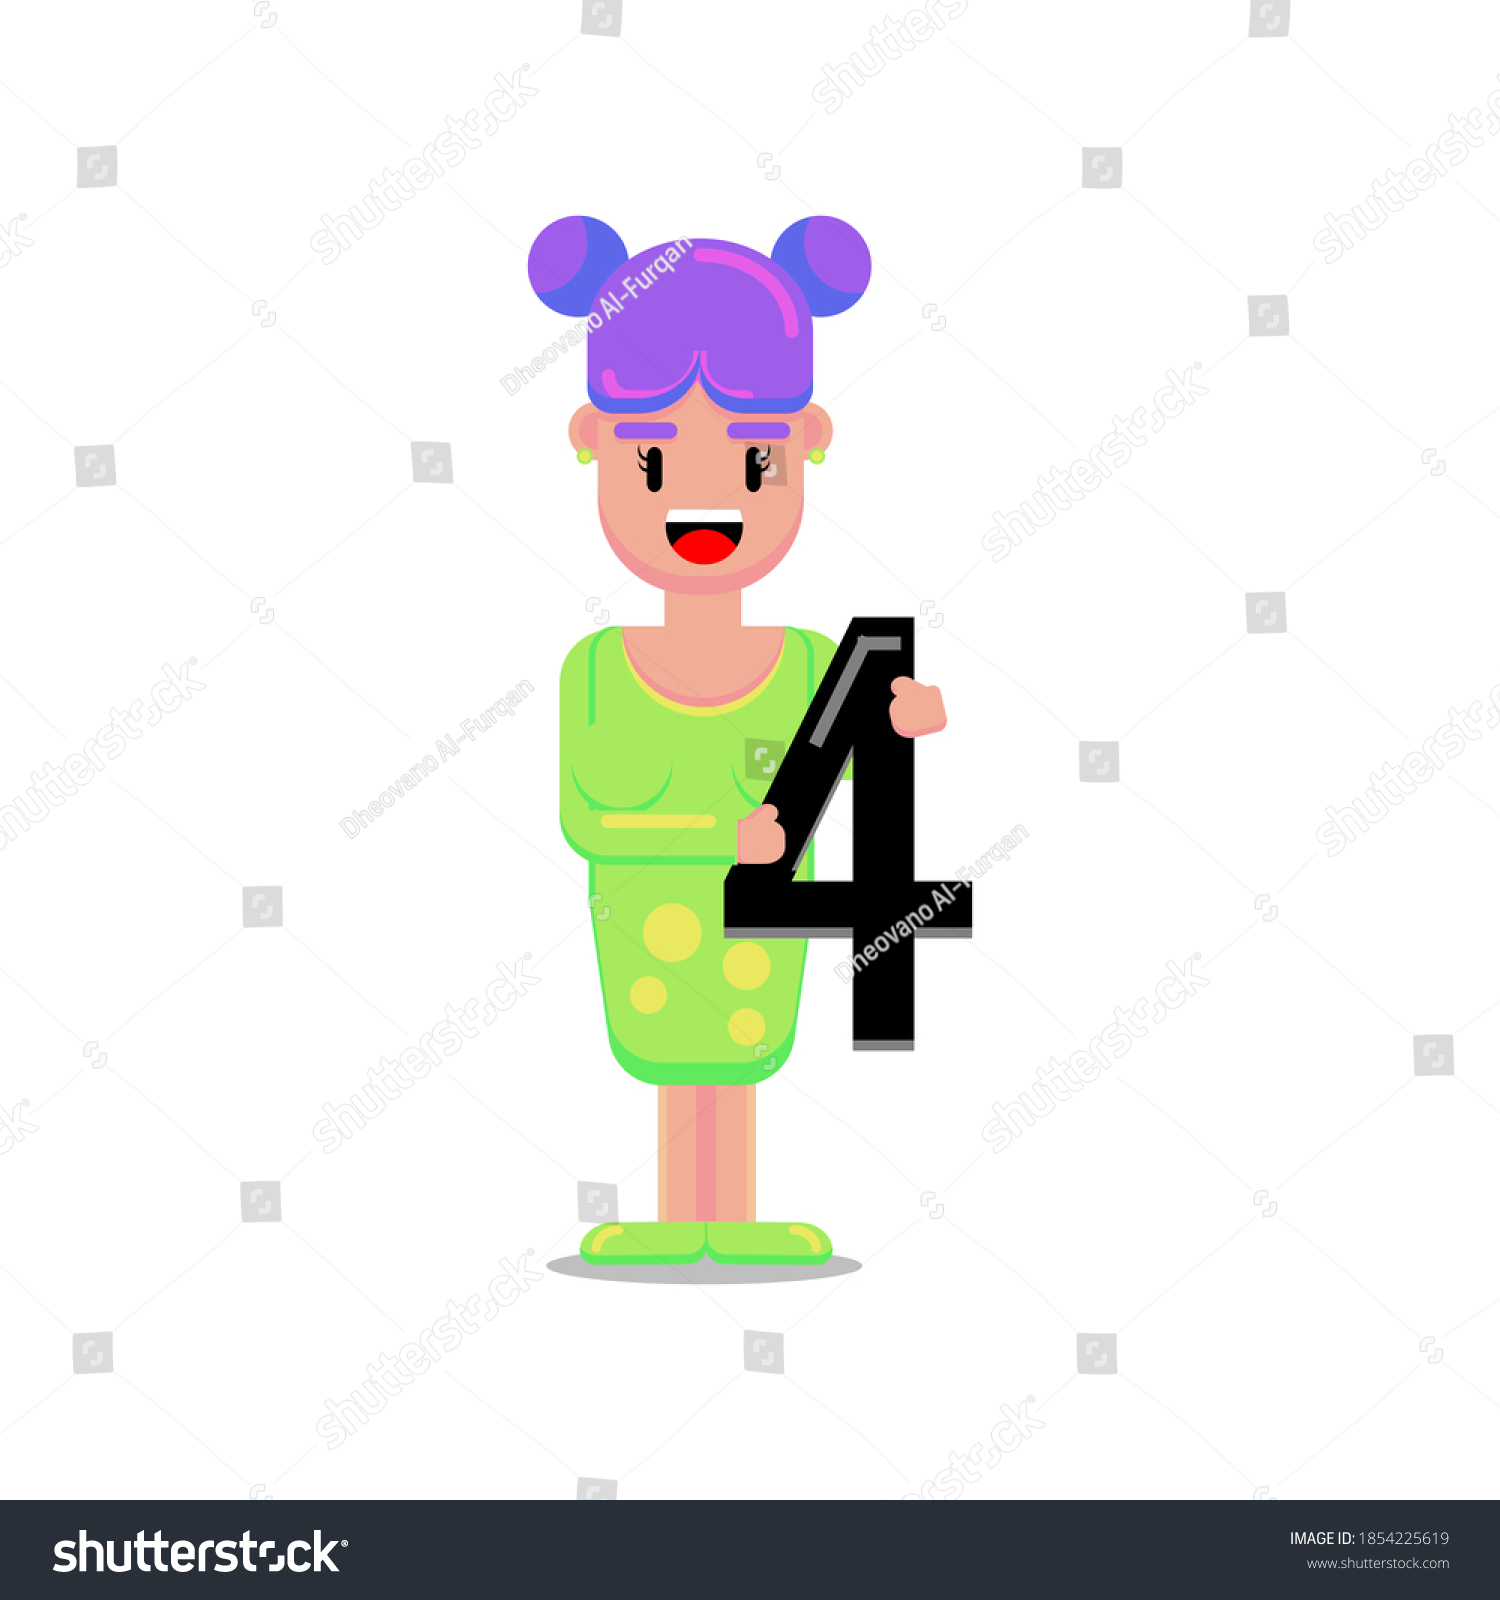 SVG of Cute Geometric Lady/Teacher/Girl Holding a Number Four 4 Character Illustration Great for Kids svg